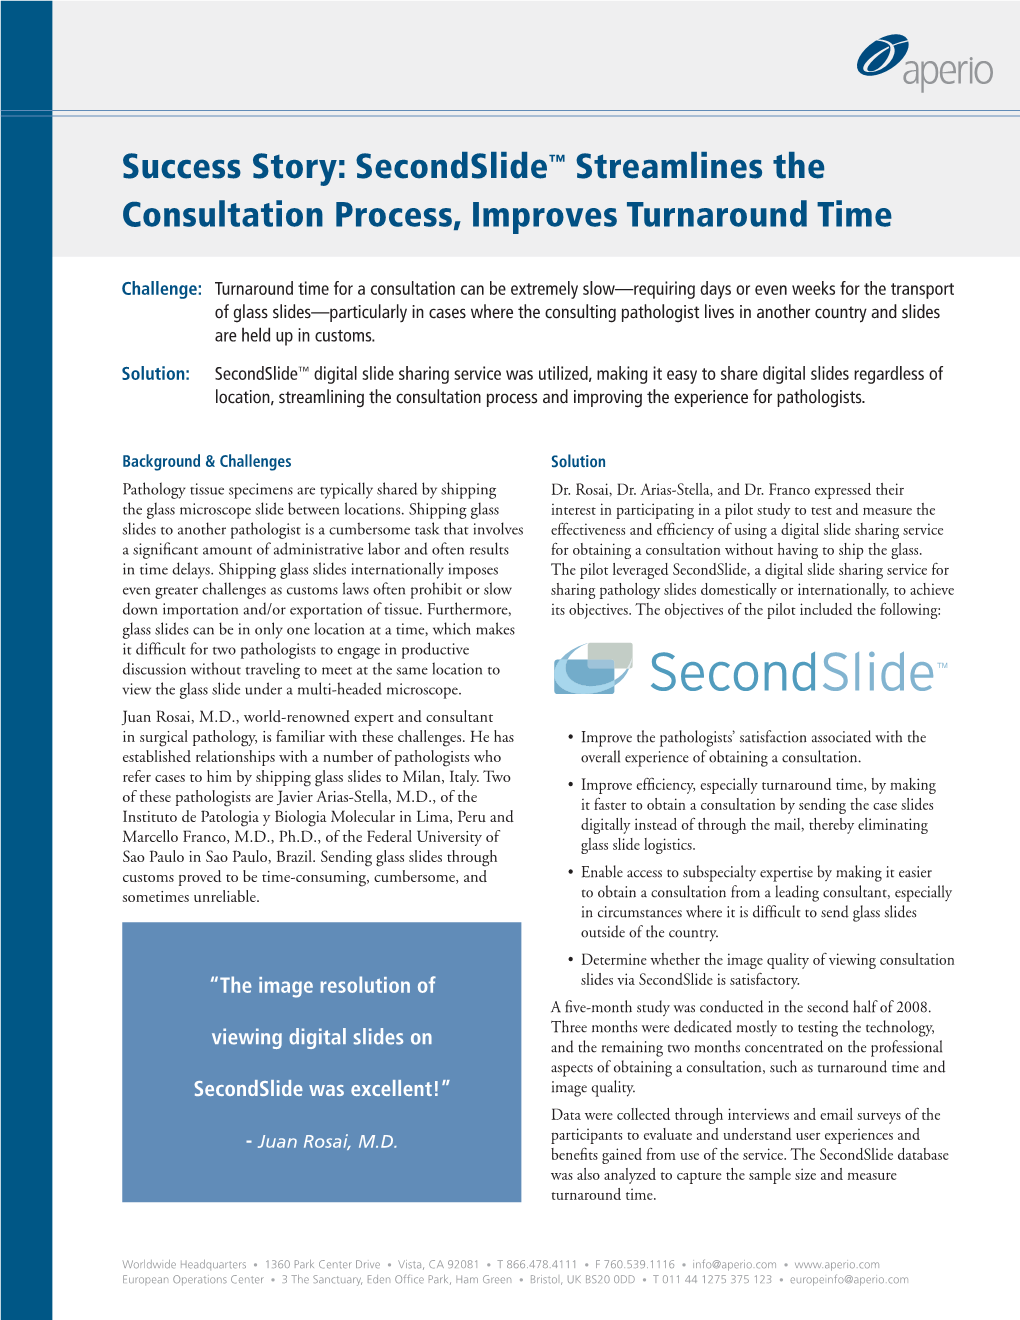 Success Story: Secondslide™ Streamlines the Consultation Process, Improves Turnaround Time